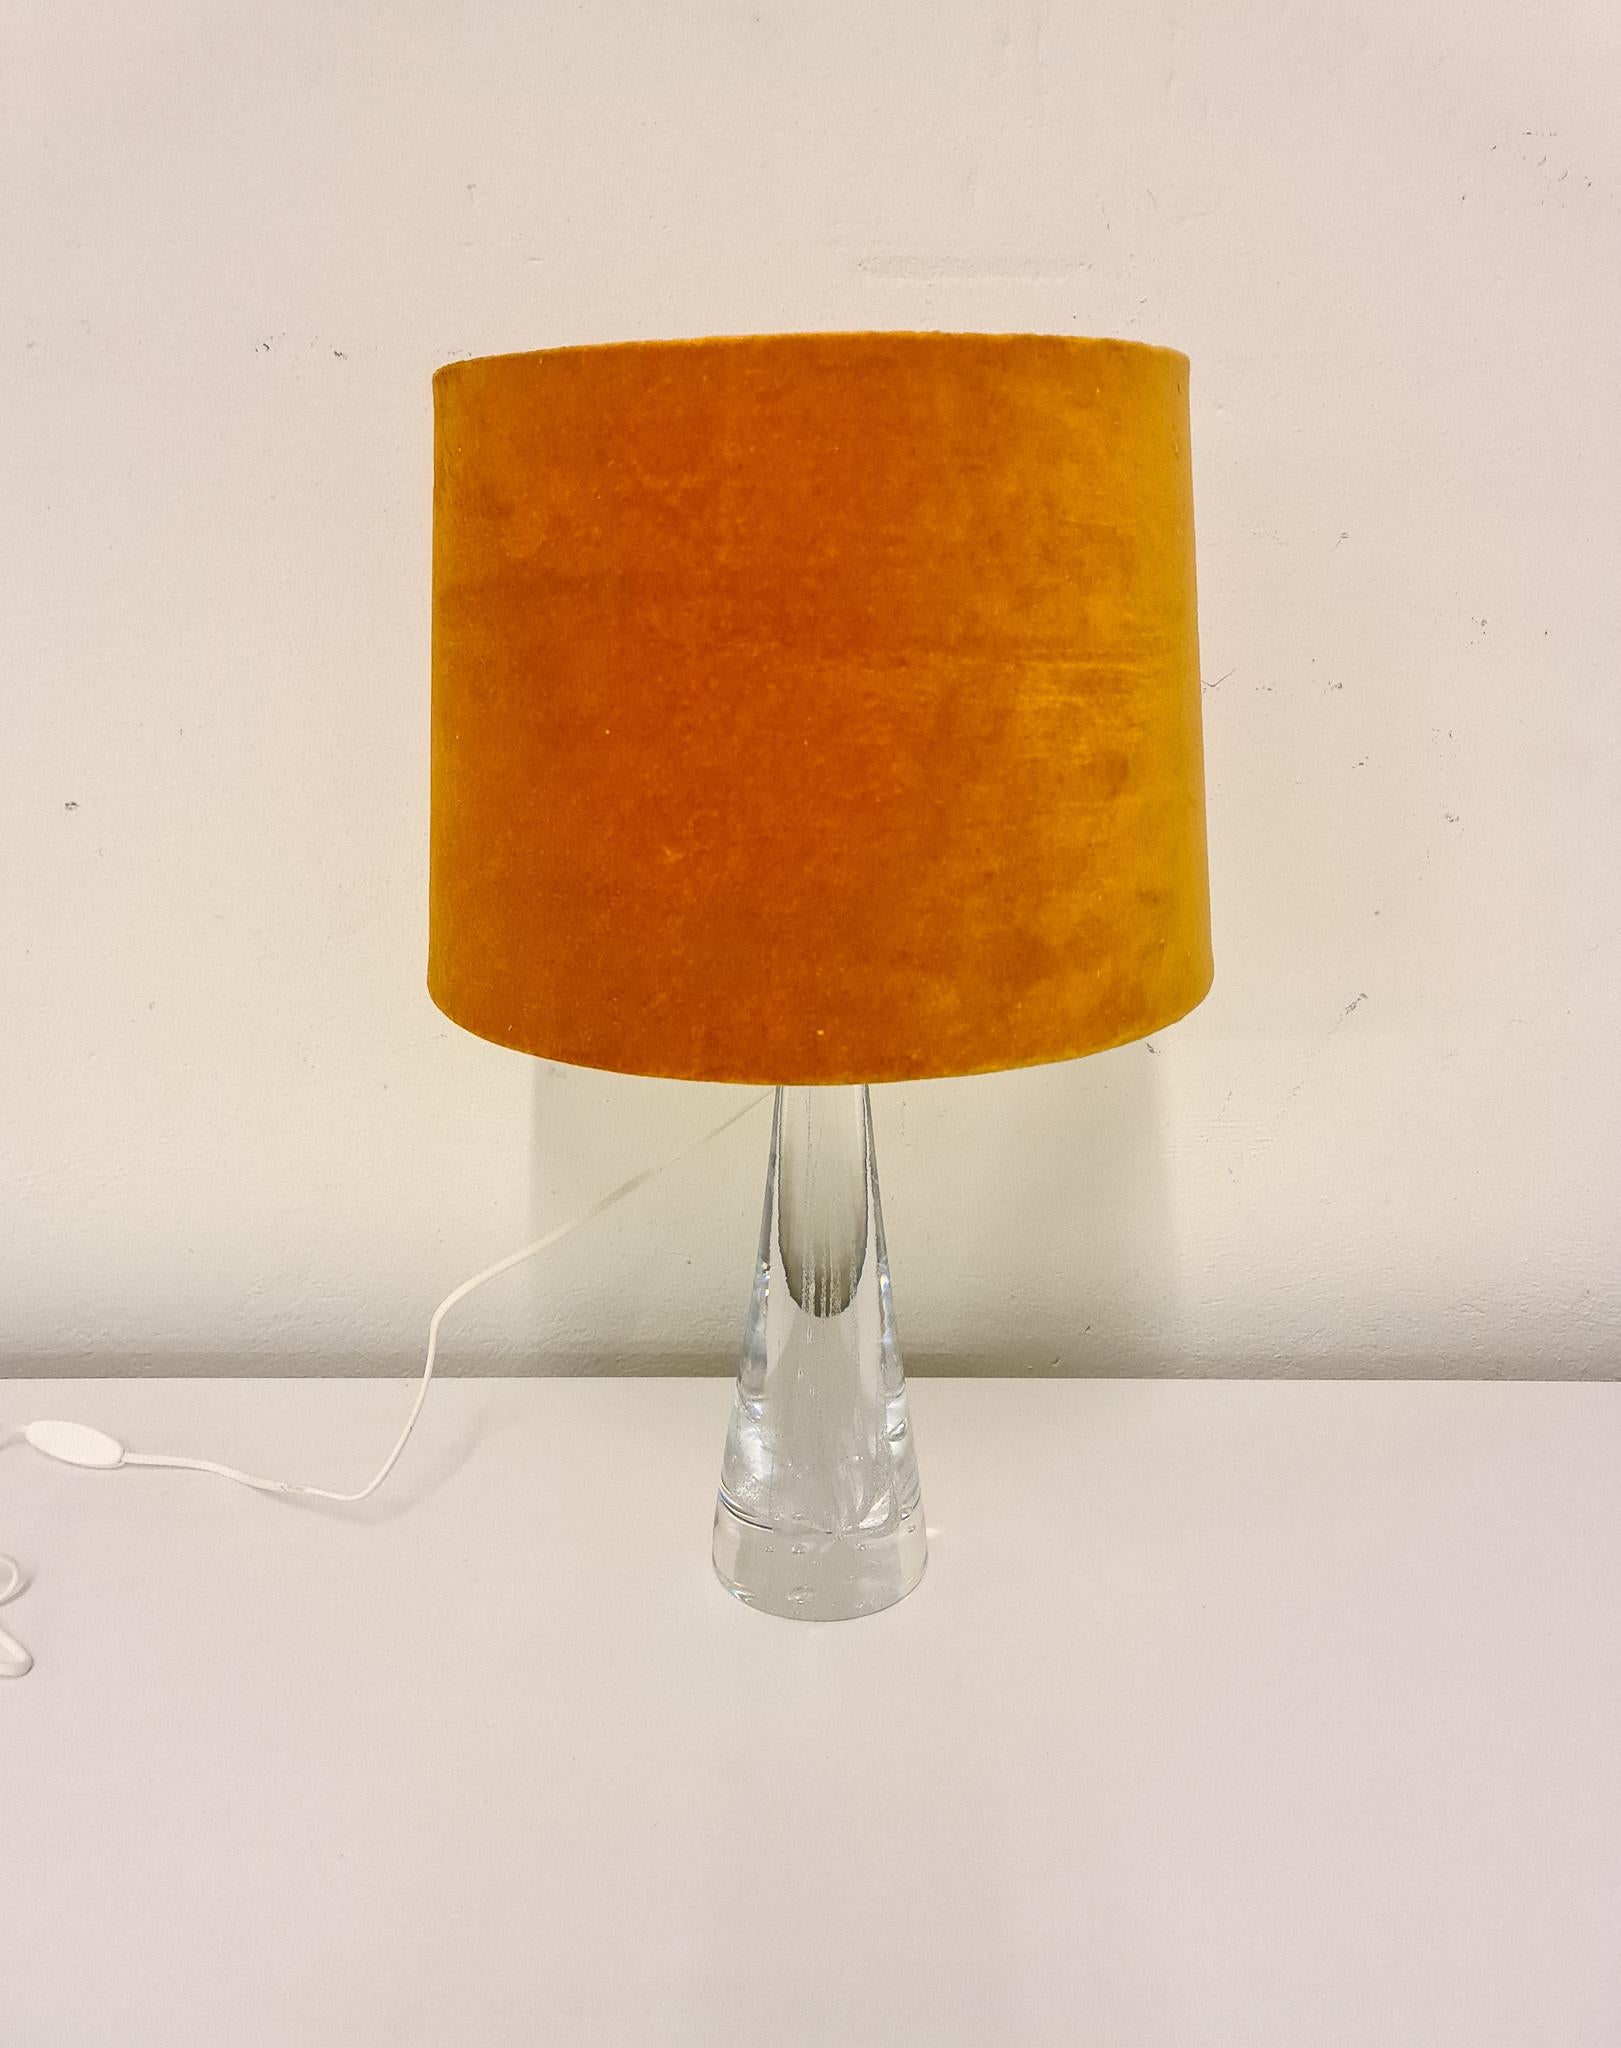 Beautiful crystal glass table lamps by Vicke Lindstrand, organic conical in shape and with swirls of bubbles captured inside. 

Good working condition

Measures: H 56 with shades 36 without. D 35 with shades.